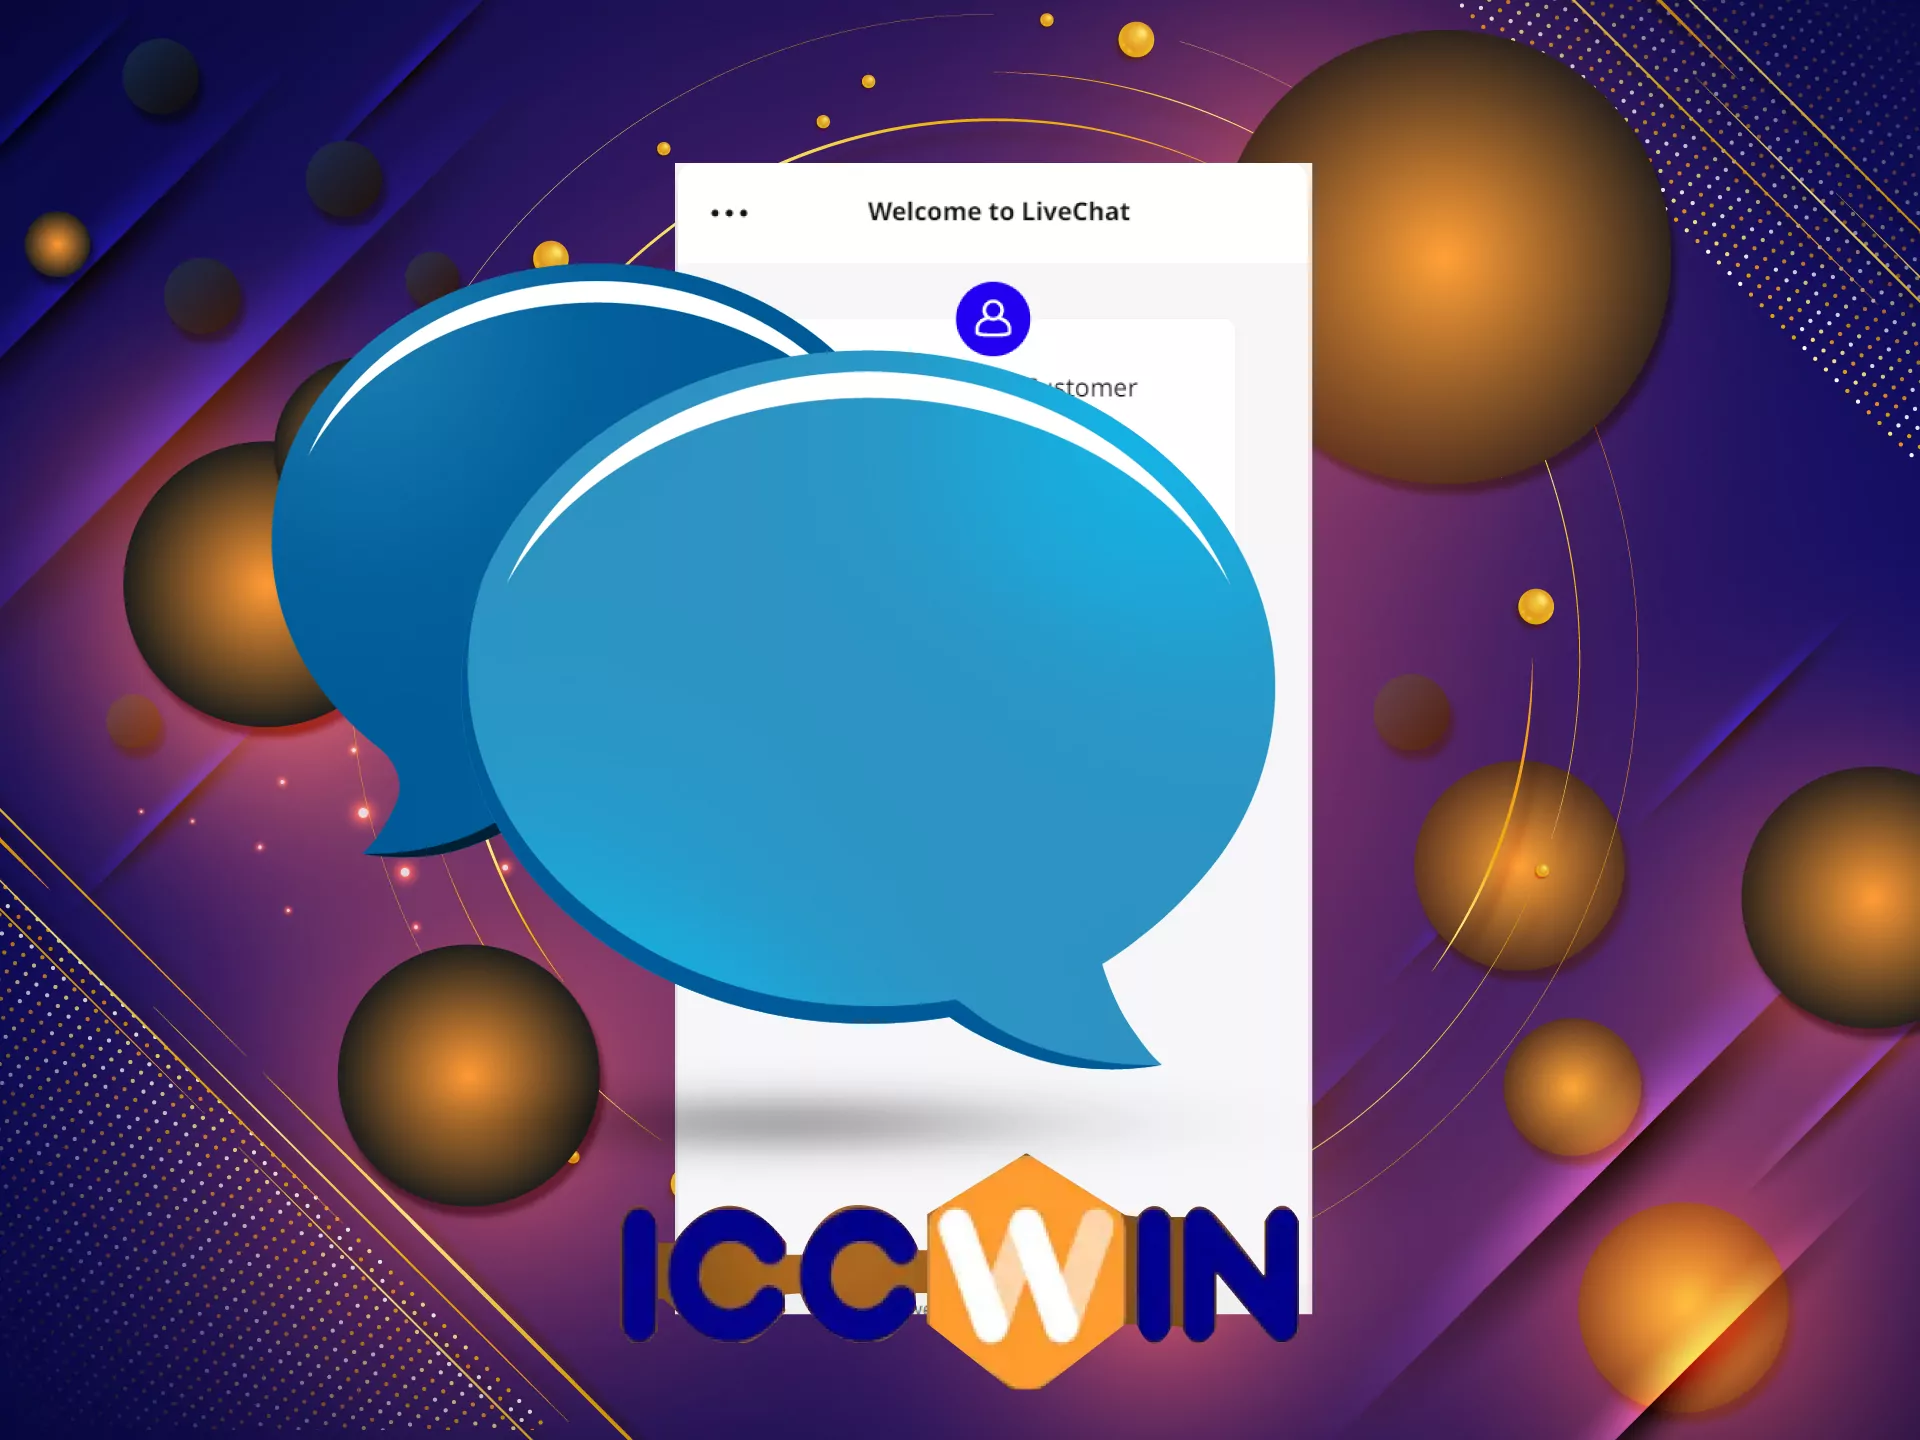 You can easily contact the ICCWIN support team via the live chat in the app.